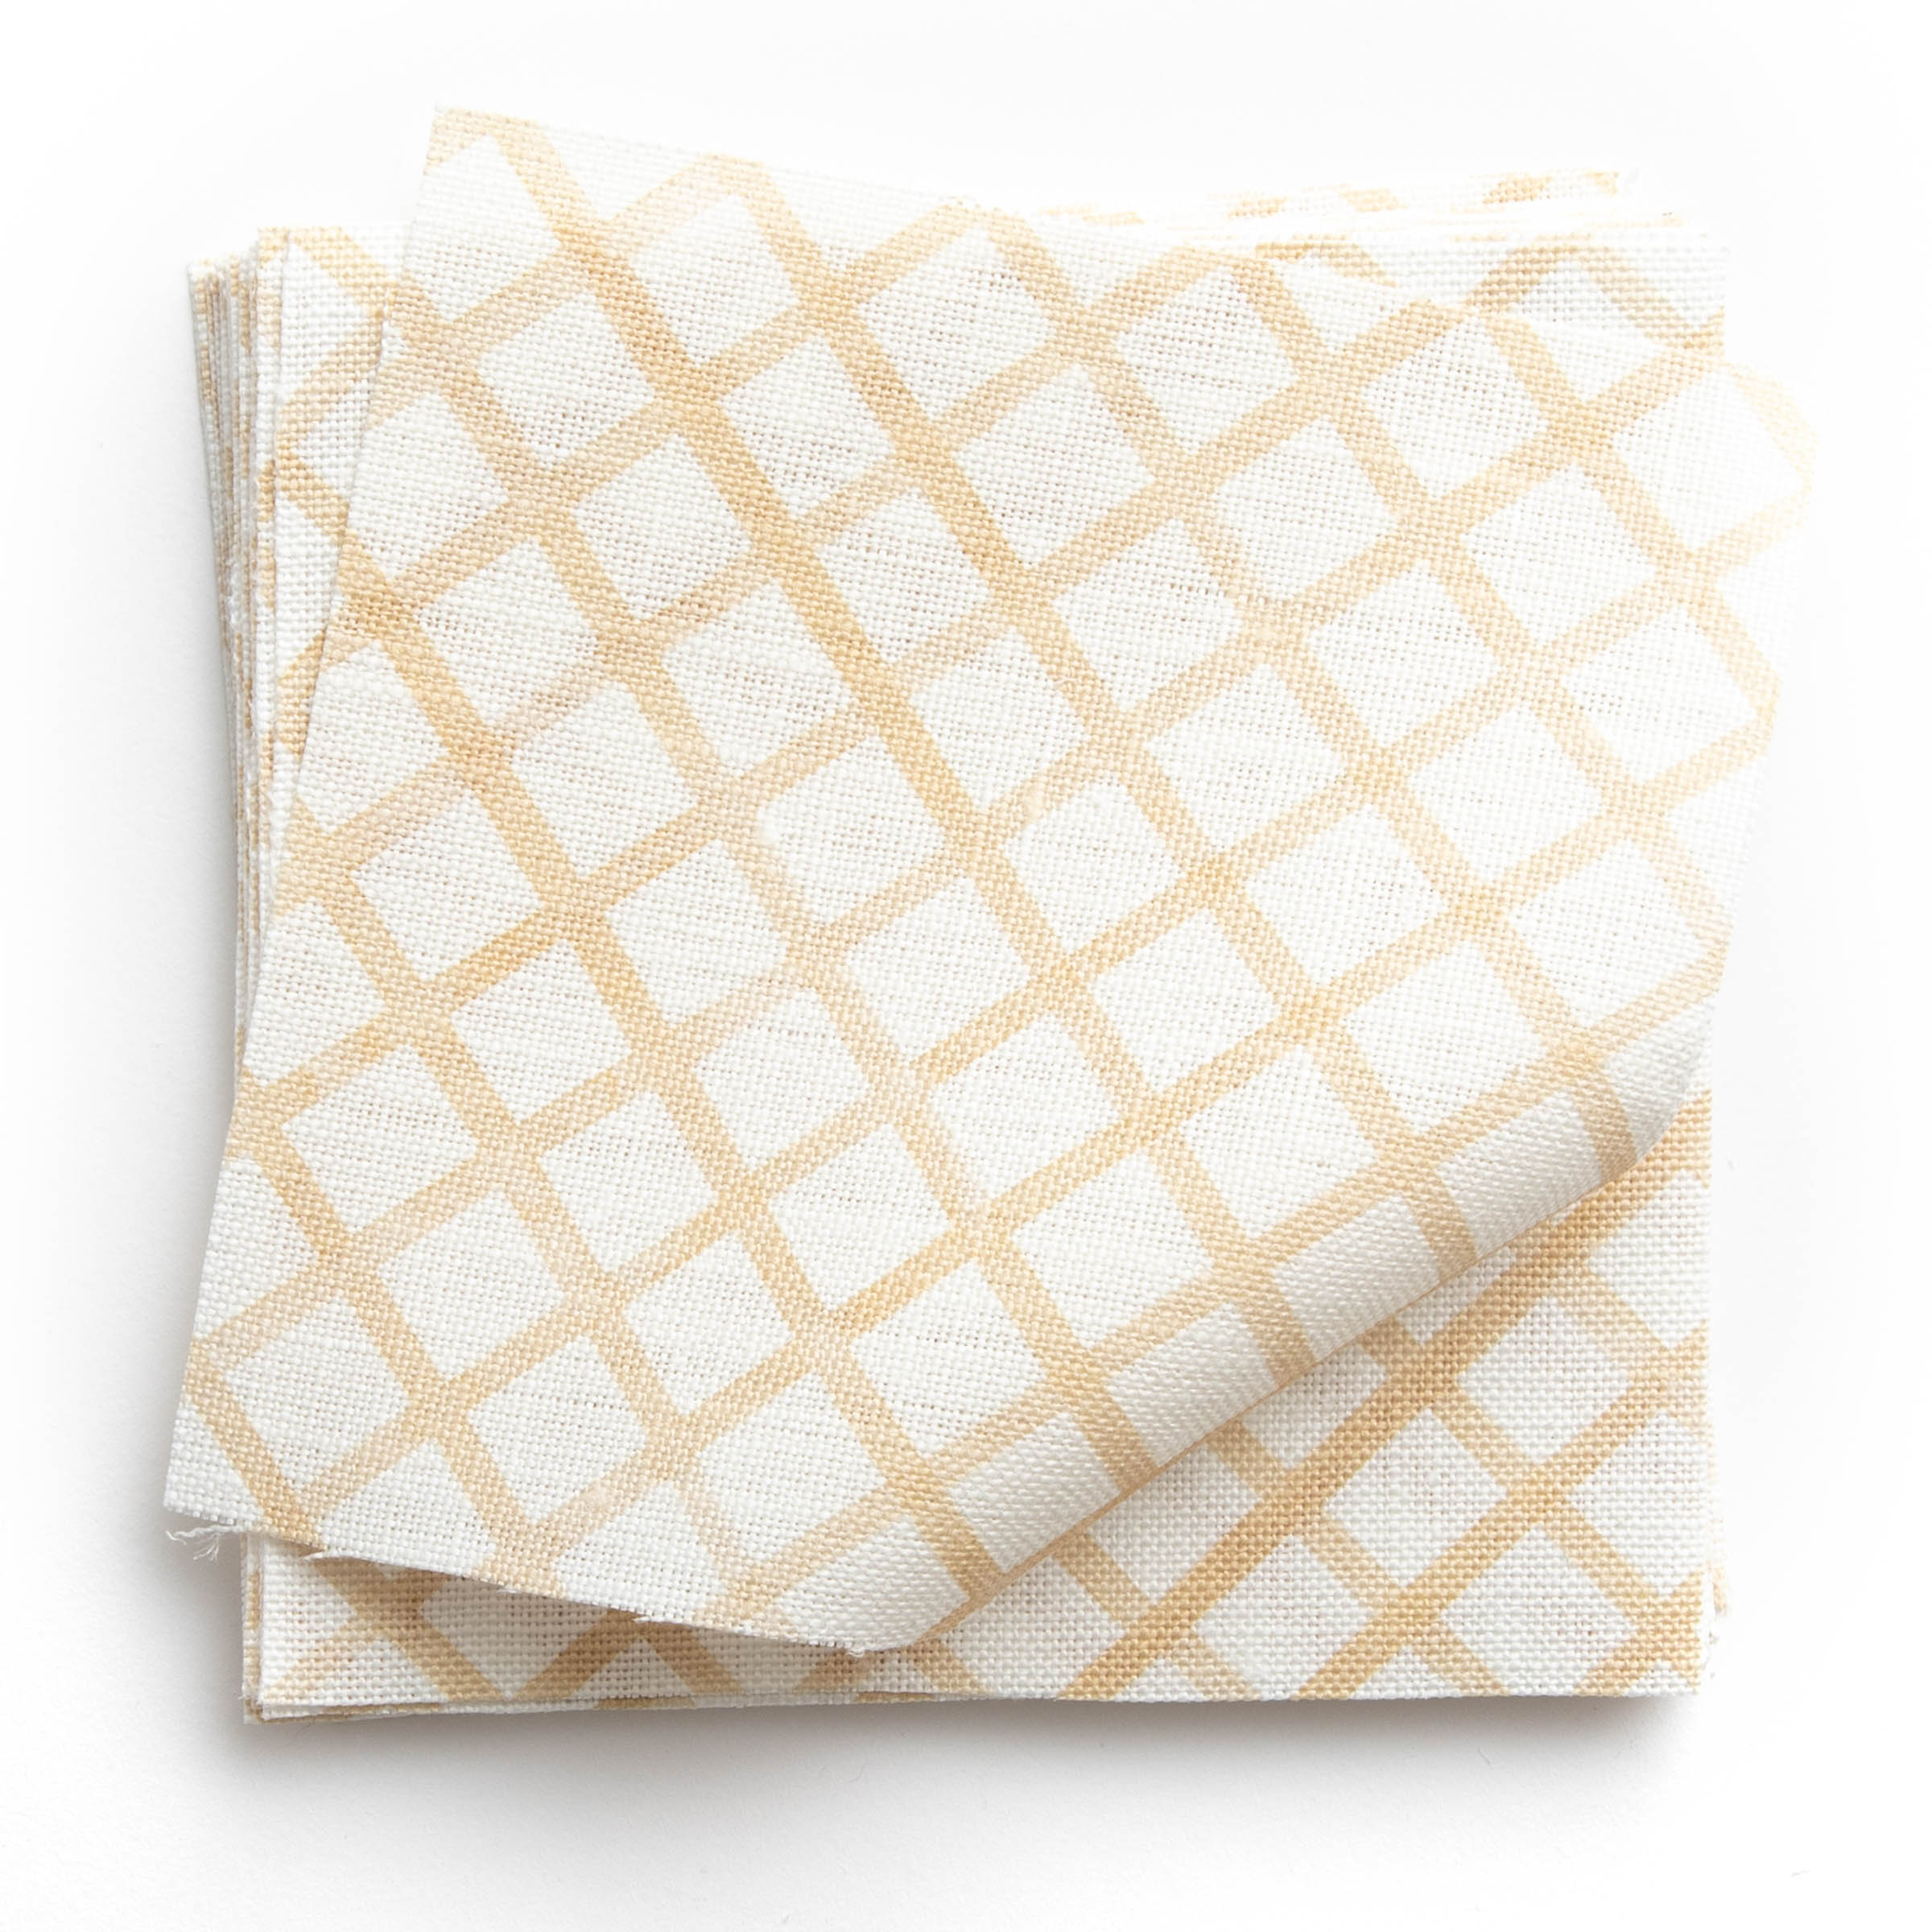 A stack of fabric swatches in a painterly grid pattern in gold on a white field.